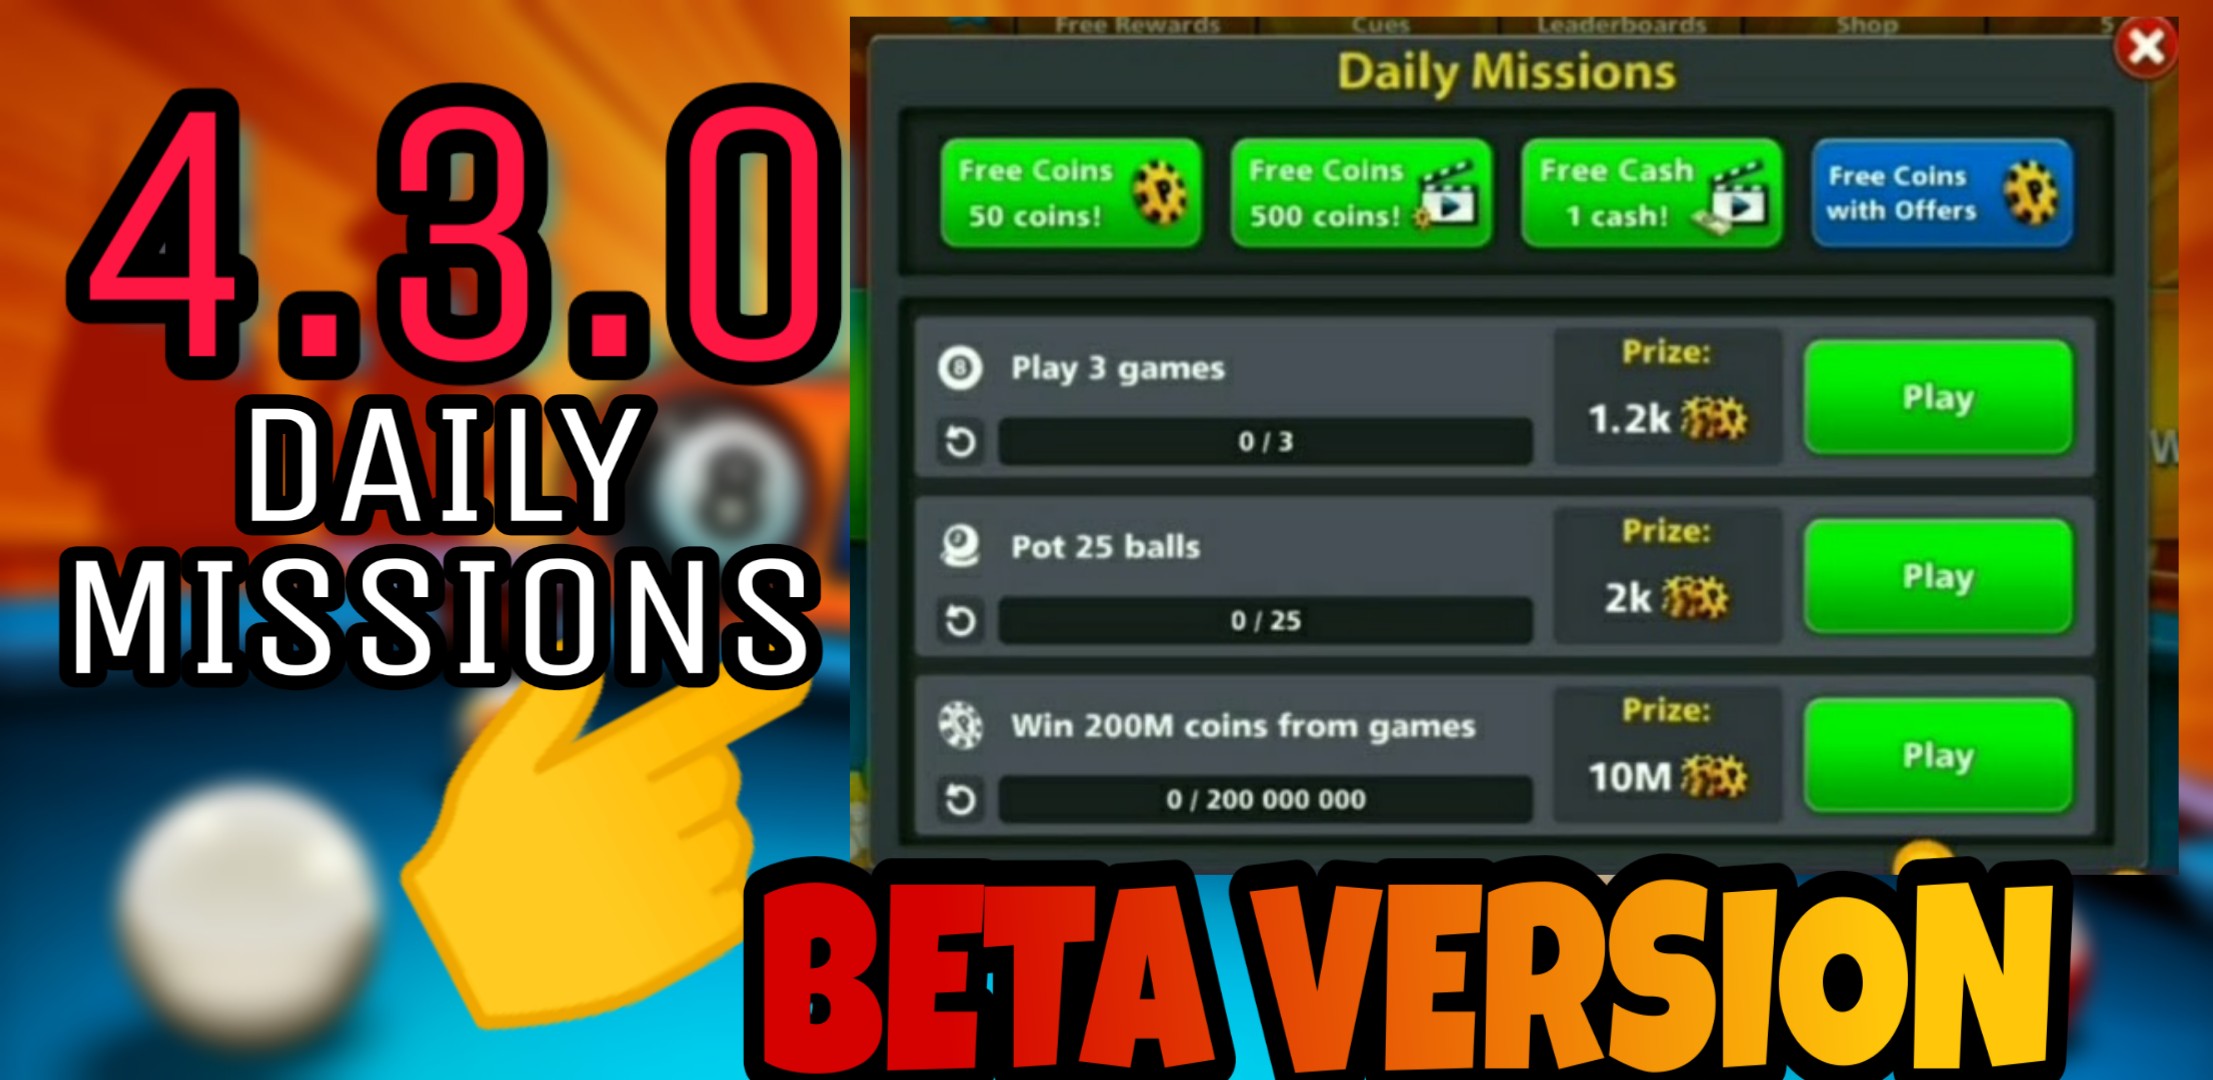 8ball Pool 4 3 0 New Update New Features Added Daily Mission Added Beta Version Hindi Language Added